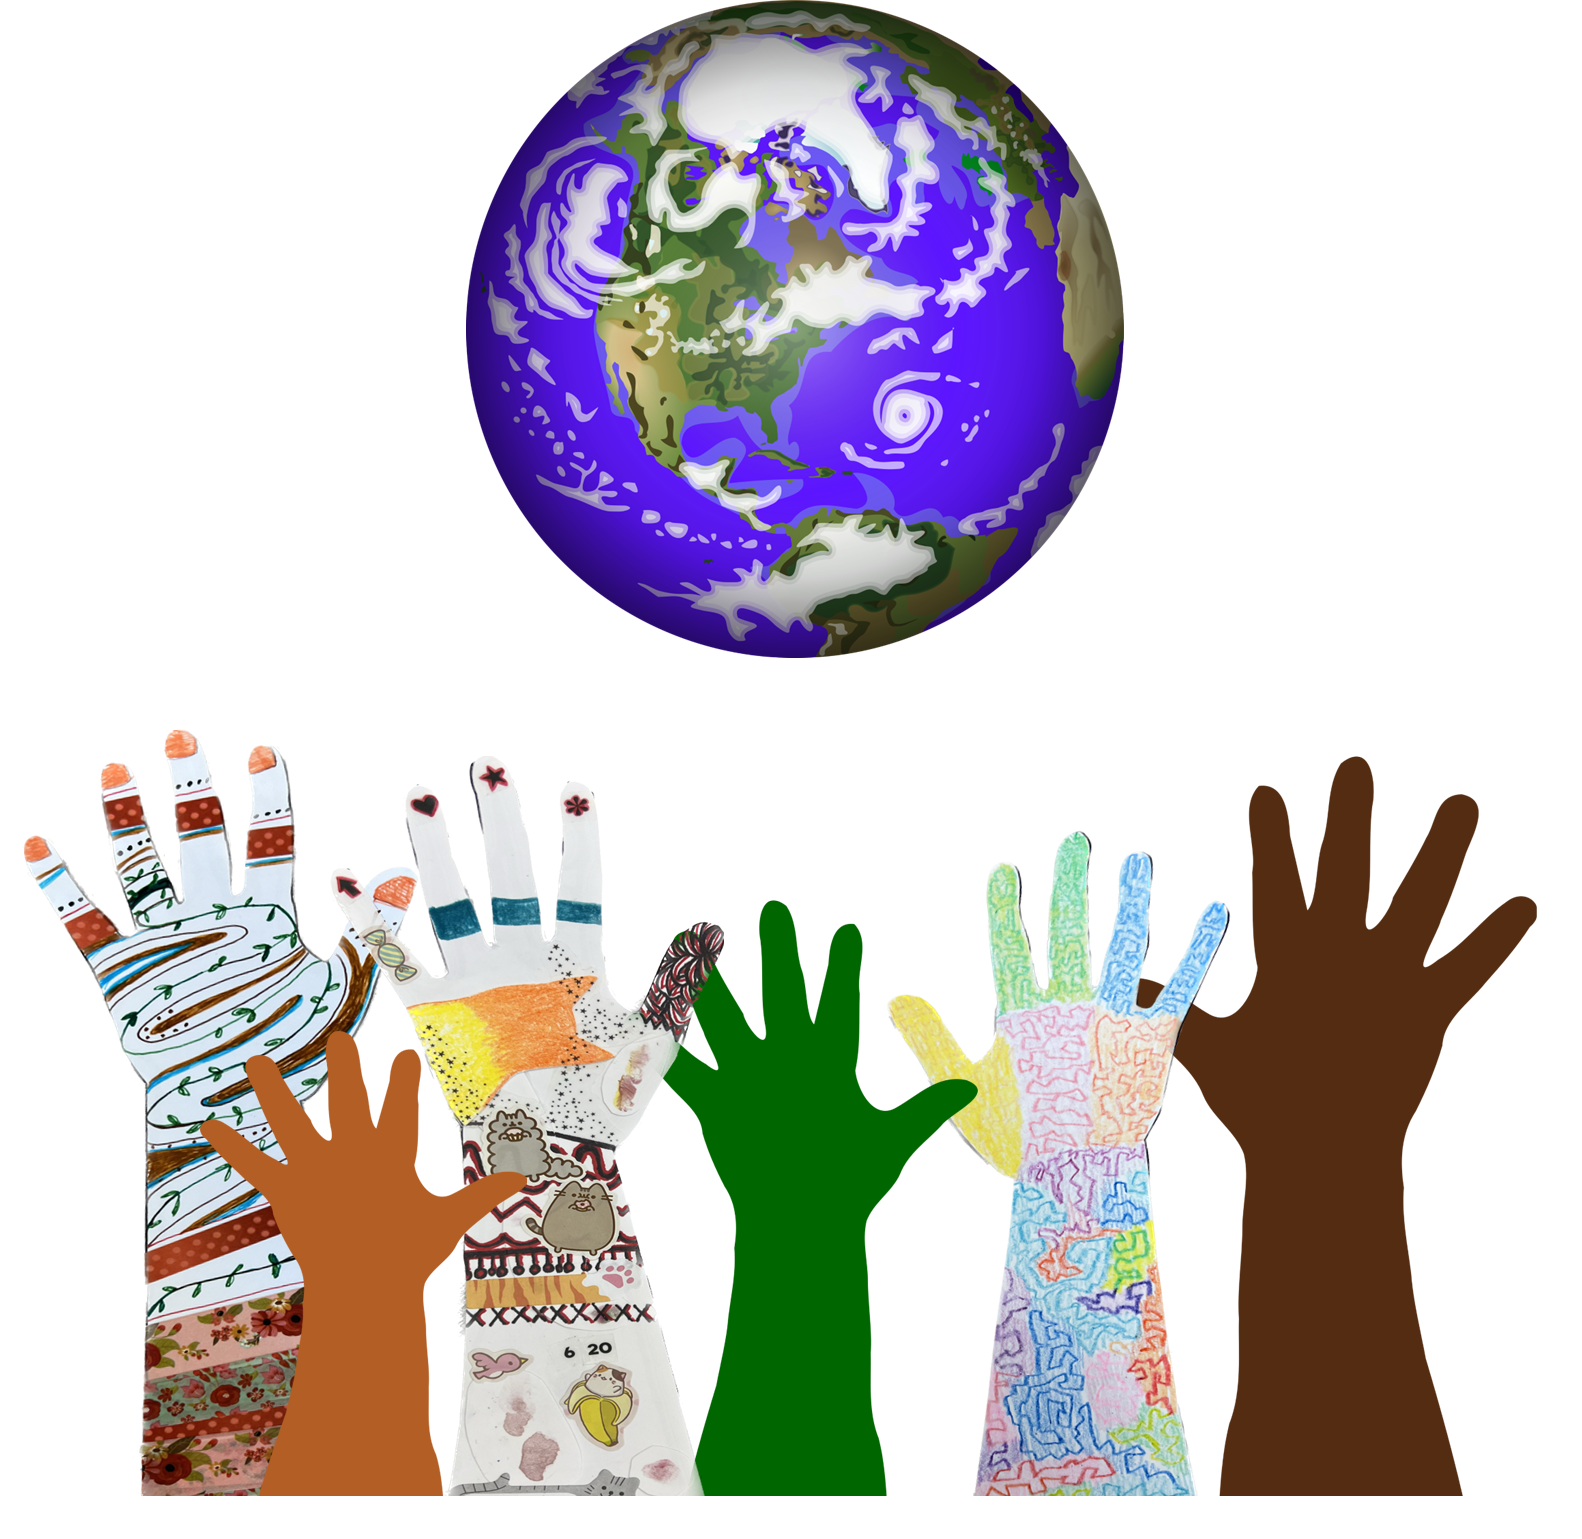 multi-colored hands appearing to hold up the earth